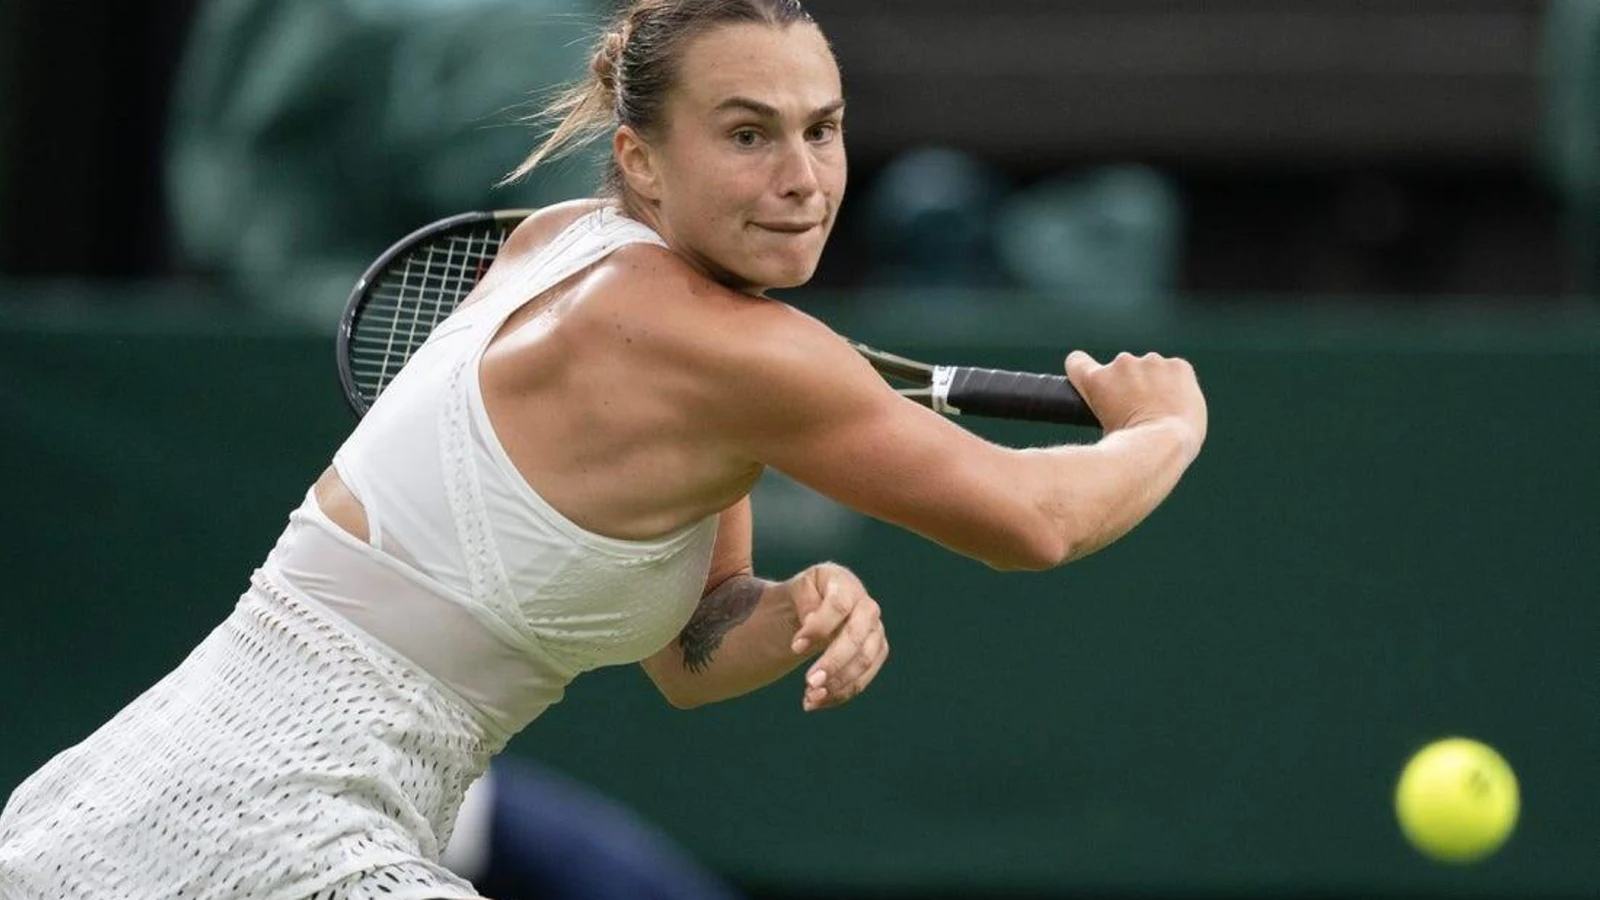 Sabalenka Comments on Defeat by Jabeur in the Wimbledon Semifinals